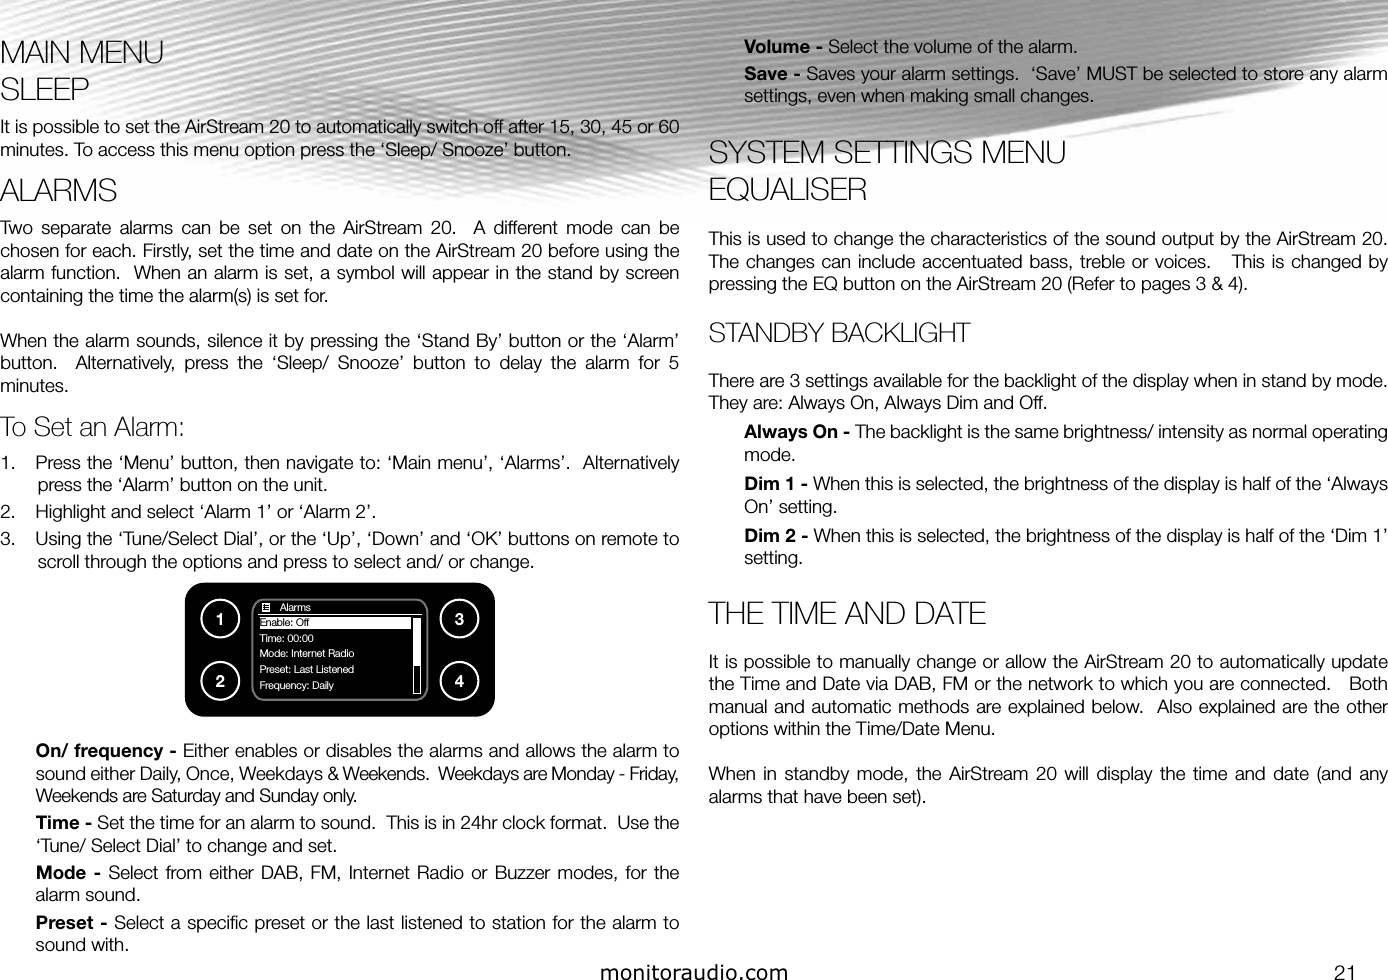 monitoraudio.com 21MAIN MENUSLEEPIt is possible to set the AirStream 20 to automatically switch off after 15, 30, 45 or 60 minutes. To access this menu option press the ‘Sleep/ Snooze’ button. ALARMS Two  separate  alarms  can  be  set  on  the  AirStream  20.    A  different  mode  can  be chosen for each. Firstly, set the time and date on the AirStream 20 before using the alarm function.  When an alarm is set, a symbol will appear in the stand by screen containing the time the alarm(s) is set for.When the alarm sounds, silence it by pressing the ‘Stand By’ button or the ‘Alarm’ button.    Alternatively,  press  the  ‘Sleep/  Snooze’  button  to  delay  the  alarm  for  5 minutes.To Set an Alarm:1.  Press the ‘Menu’ button, then navigate to: ‘Main menu’, ‘Alarms’.  Alternatively press the ‘Alarm’ button on the unit.2.  Highlight and select ‘Alarm 1’ or ‘Alarm 2’.3.  Using the ‘Tune/Select Dial’, or the ‘Up’, ‘Down’ and ‘OK’ buttons on remote to scroll through the options and press to select and/ or change.On/ frequency - Either enables or disables the alarms and allows the alarm to sound either Daily, Once, Weekdays &amp; Weekends.  Weekdays are Monday - Friday, Weekends are Saturday and Sunday only.Time - Set the time for an alarm to sound.  This is in 24hr clock format.  Use the ‘Tune/ Select Dial’ to change and set.Mode -  Select from either  DAB, FM,  Internet  Radio or Buzzer  modes, for the alarm sound.Preset - Select a speciﬁc preset or the last listened to station for the alarm to sound with.Volume - Select the volume of the alarm.Save - Saves your alarm settings.  ‘Save’ MUST be selected to store any alarm settings, even when making small changes.SYSTEM SETTINGS MENUEQUALISERThis is used to change the characteristics of the sound output by the AirStream 20.  The changes can include accentuated bass, treble or voices.   This is changed by pressing the EQ button on the AirStream 20 (Refer to pages 3 &amp; 4).  STANDBY BACKLIGHTThere are 3 settings available for the backlight of the display when in stand by mode.    They are: Always On, Always Dim and Off.  Always On - The backlight is the same brightness/ intensity as normal operating mode.Dim 1 - When this is selected, the brightness of the display is half of the ‘Always On’ setting.Dim 2 - When this is selected, the brightness of the display is half of the ‘Dim 1’ setting.THE TIME AND DATEIt is possible to manually change or allow the AirStream 20 to automatically update the Time and Date via DAB, FM or the network to which you are connected.   Both manual and automatic methods are explained below.  Also explained are the other options within the Time/Date Menu.When  in  standby mode,  the  AirStream  20 will  display  the  time  and  date  (and  any alarms that have been set).1234       AlarmsEnable: OffTime: 00:00Mode: Internet RadioPreset: Last Listened                       Frequency: Daily